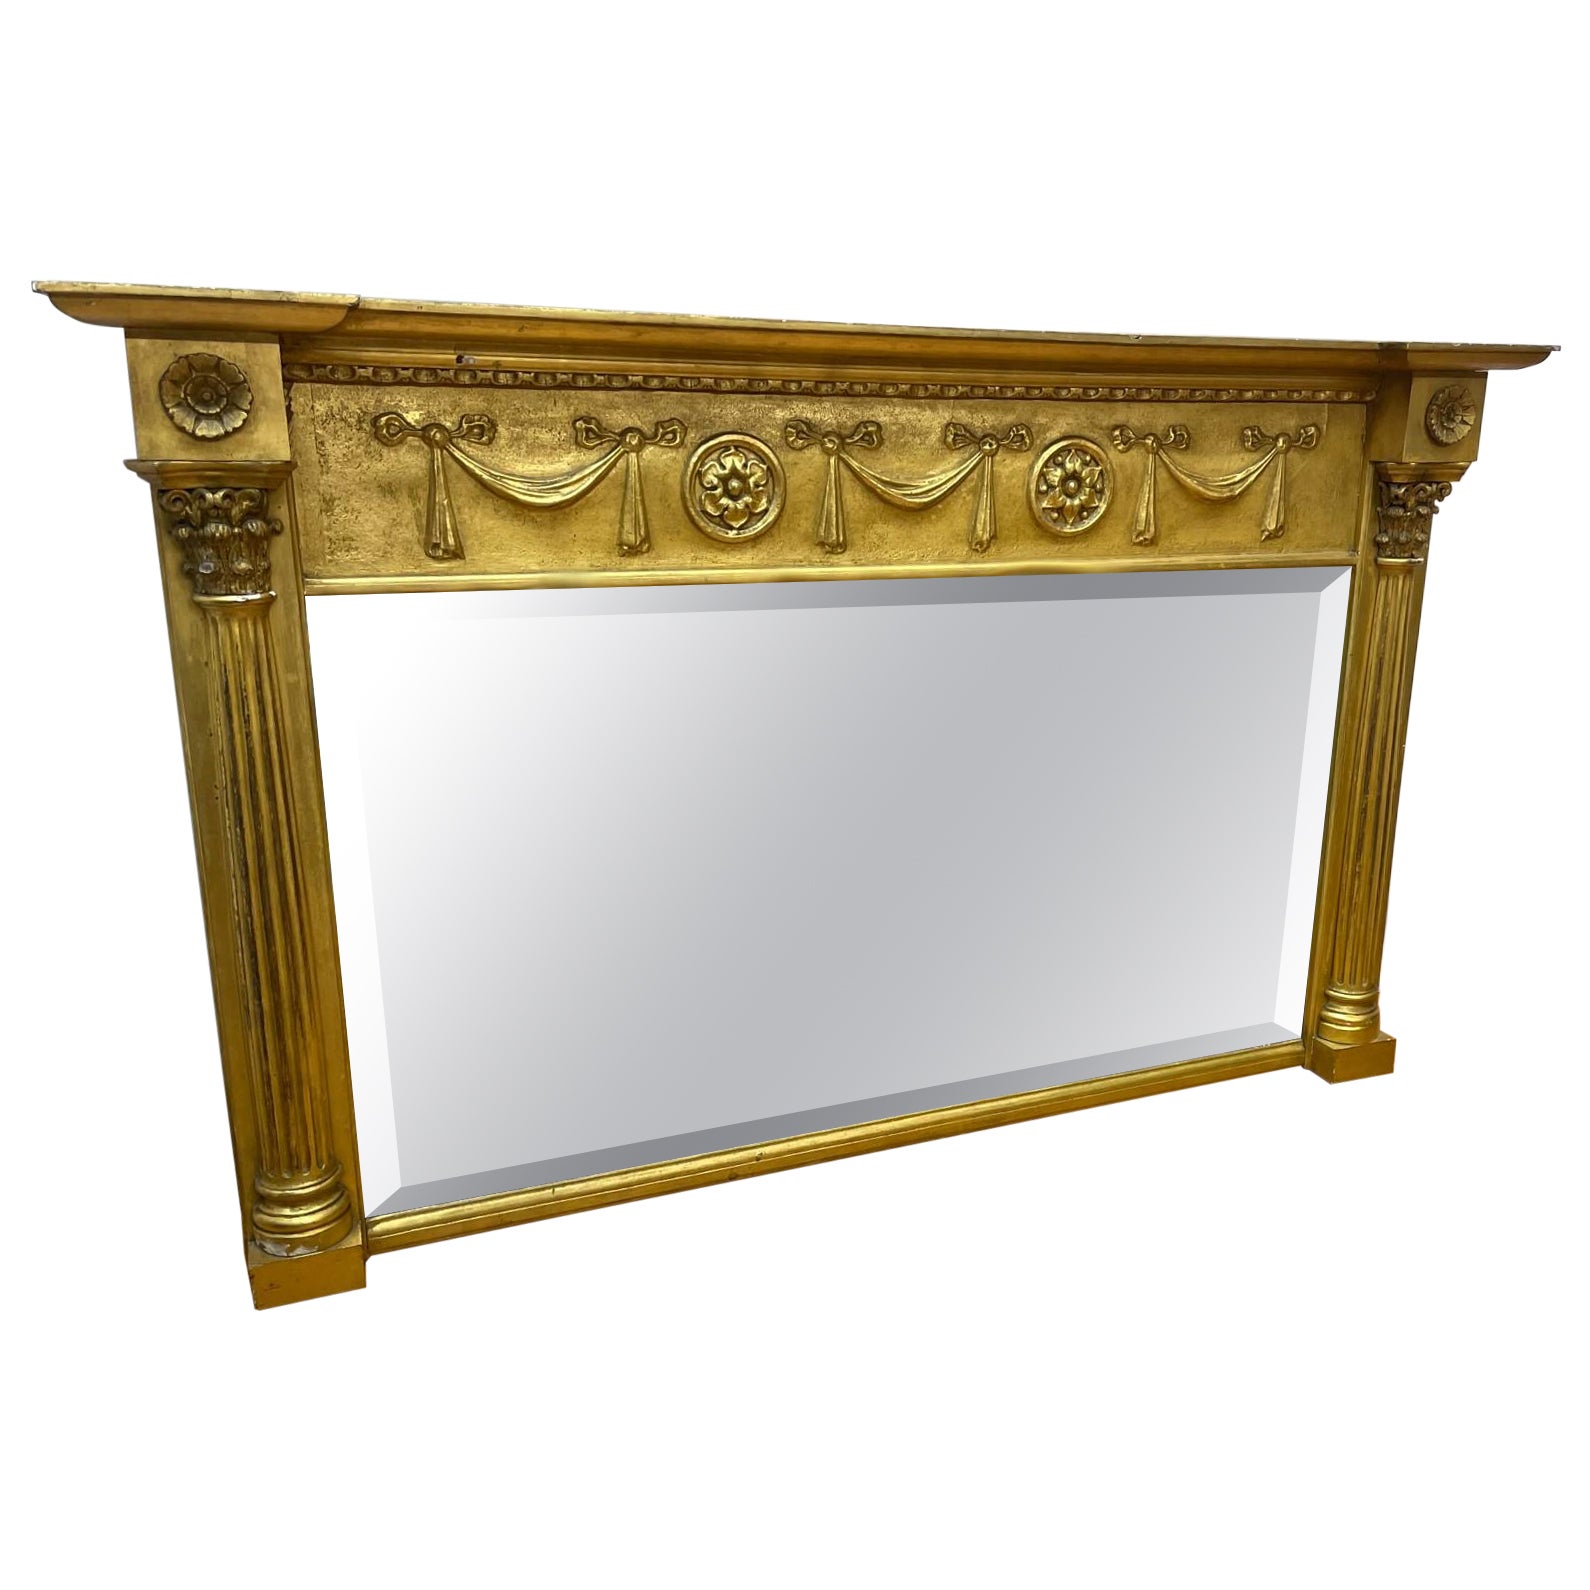 What is an overmantel?